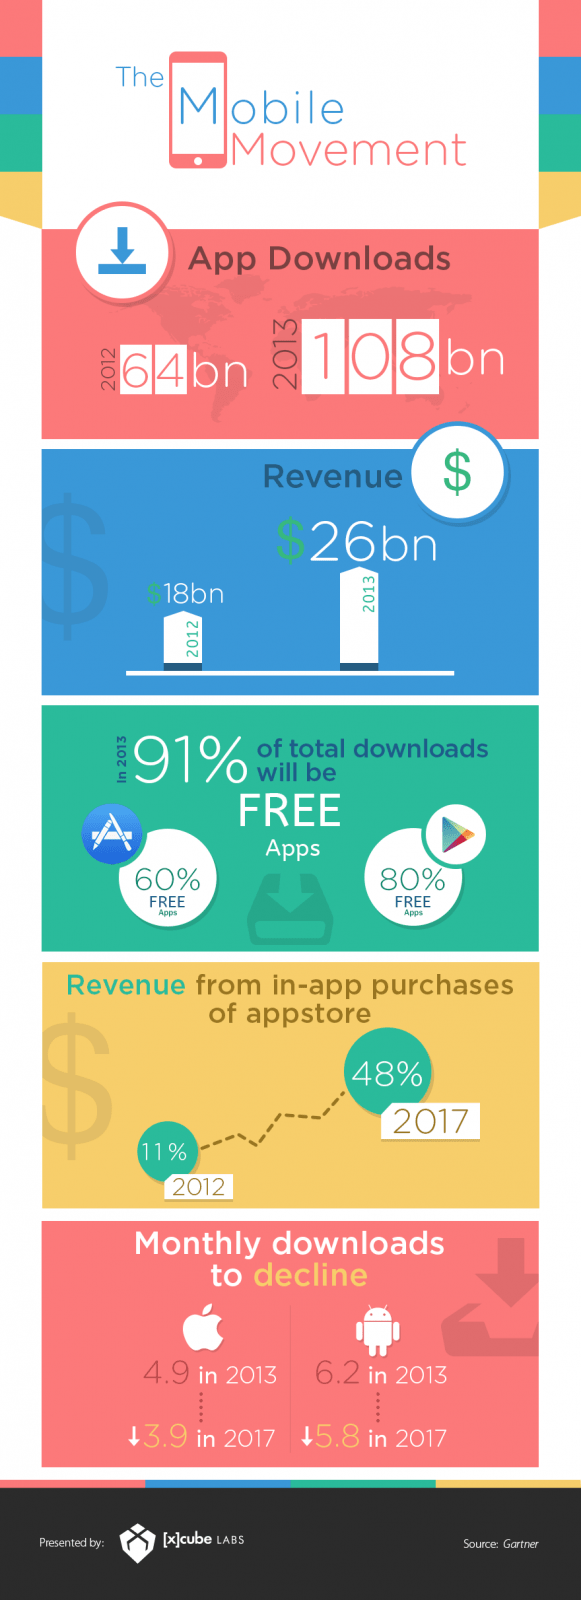 The Mobile Movement Infographic